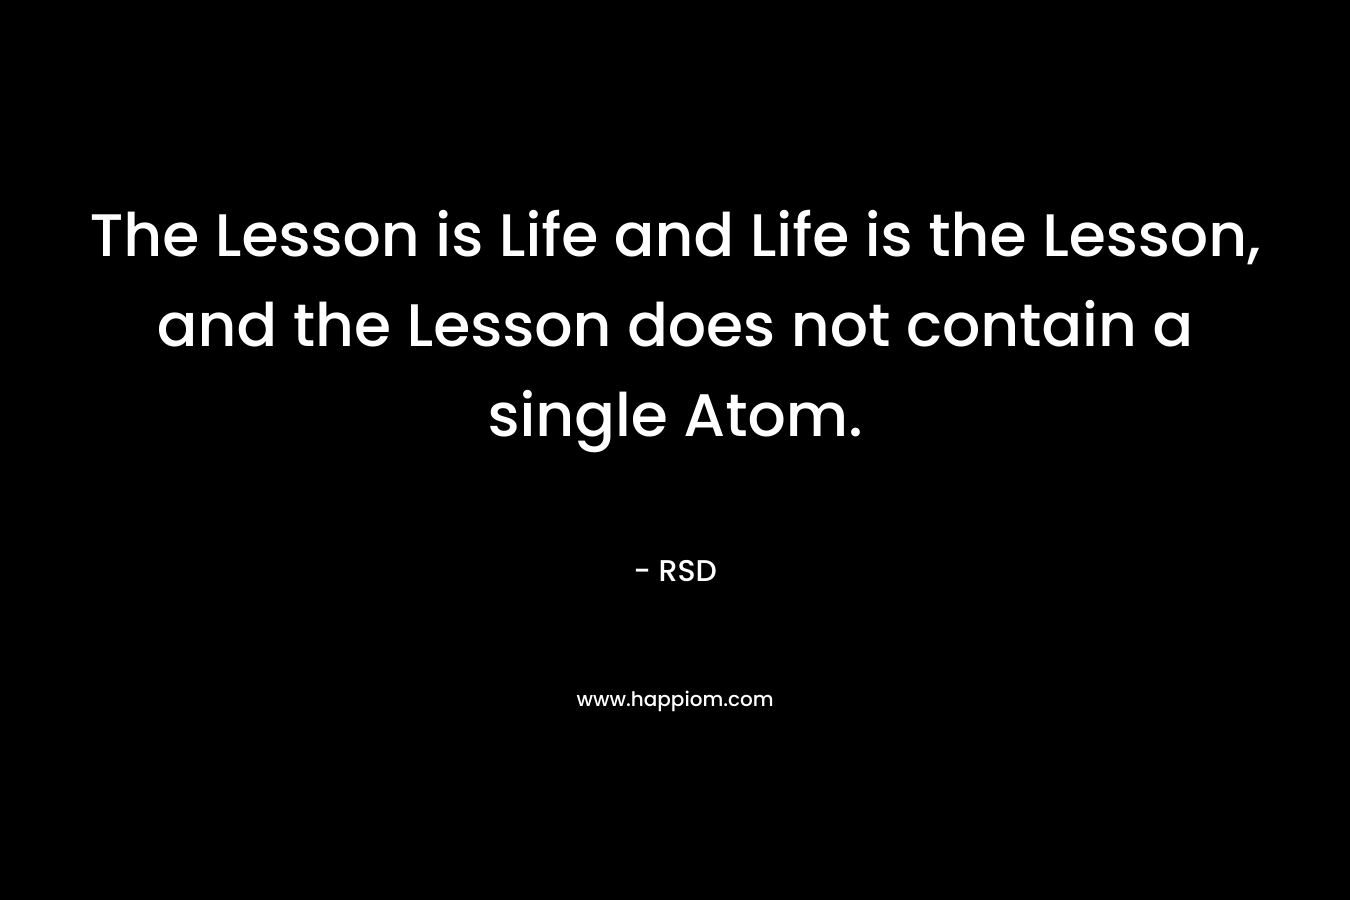 The Lesson is Life and Life is the Lesson, and the Lesson does not contain a single Atom.